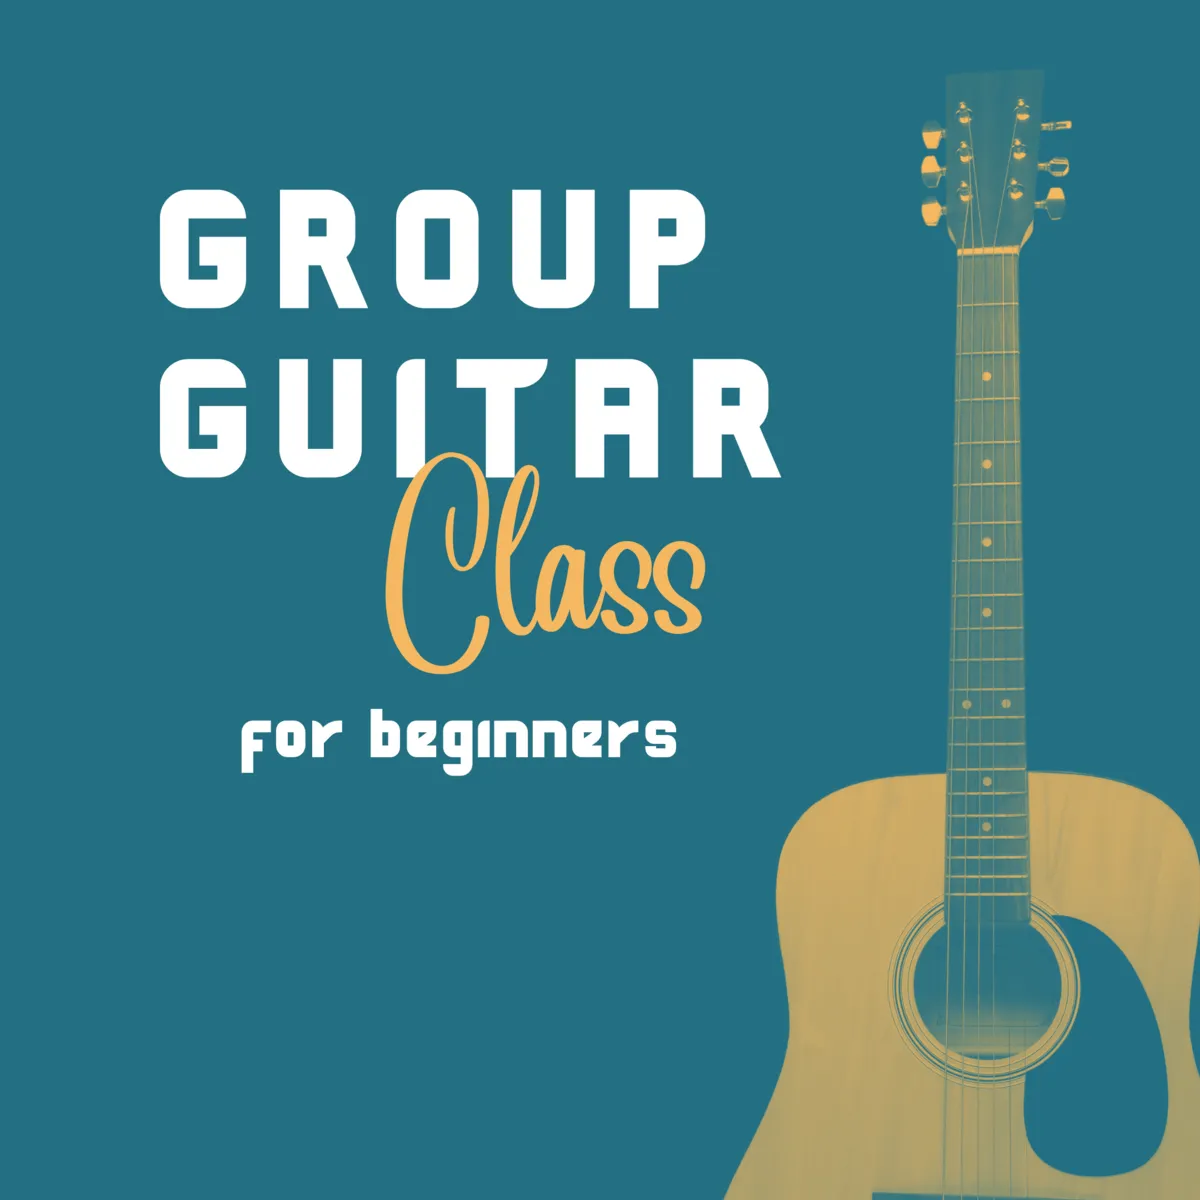 Group Guitar Lessons - 3 payments